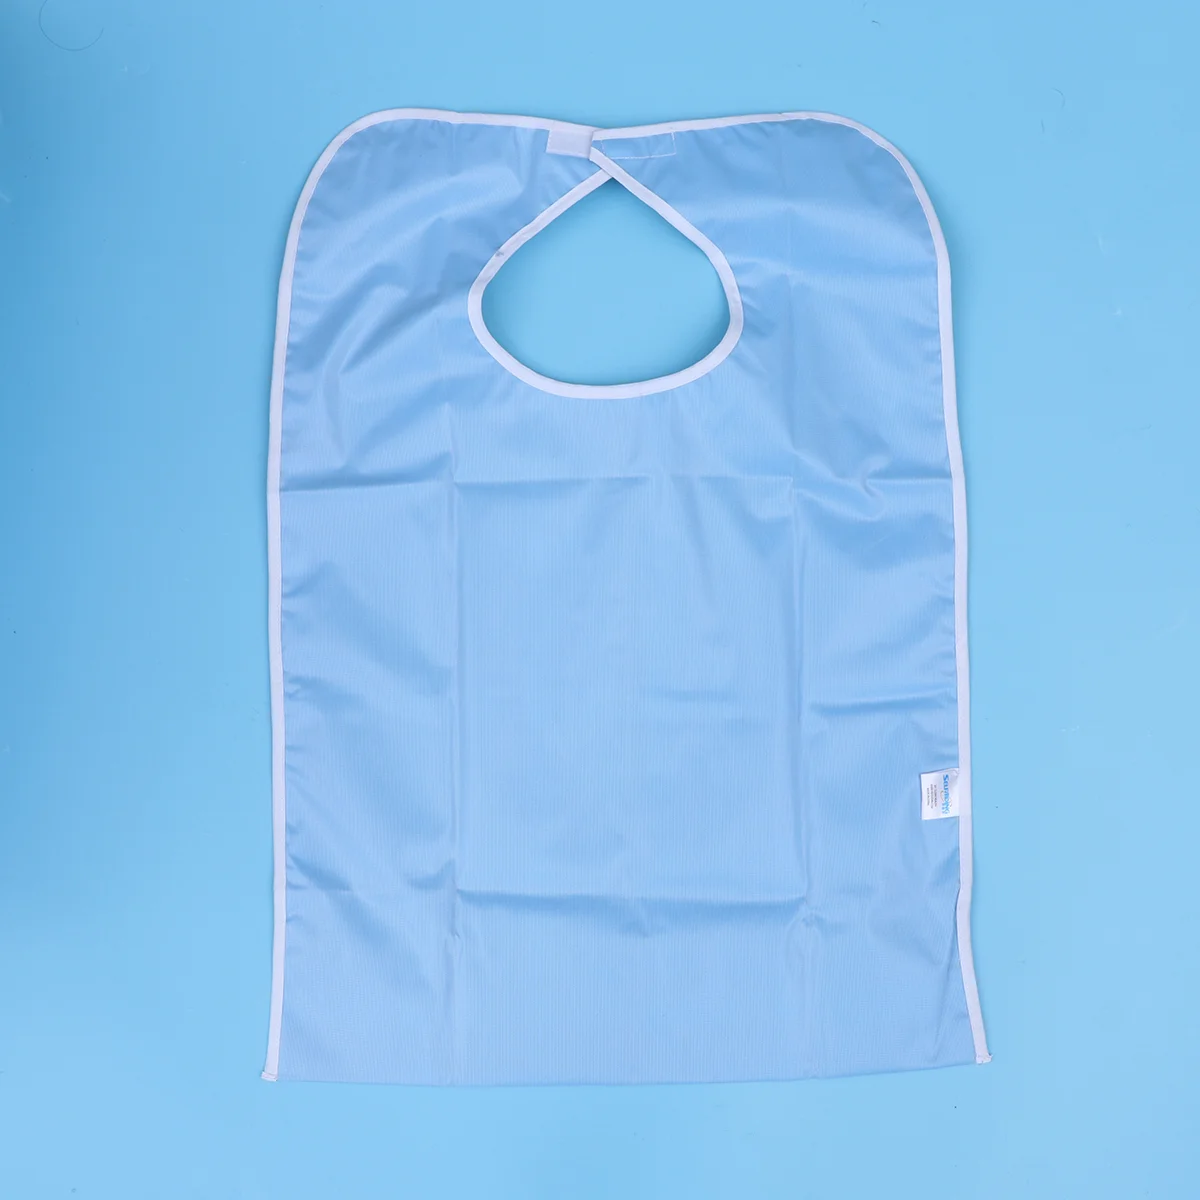 

Bibs for Eating Washable, Waterproof Clothing Protector for Seniors Eating at Mealtime Aid Apron with Crumb Catcher for Man/ 1pc